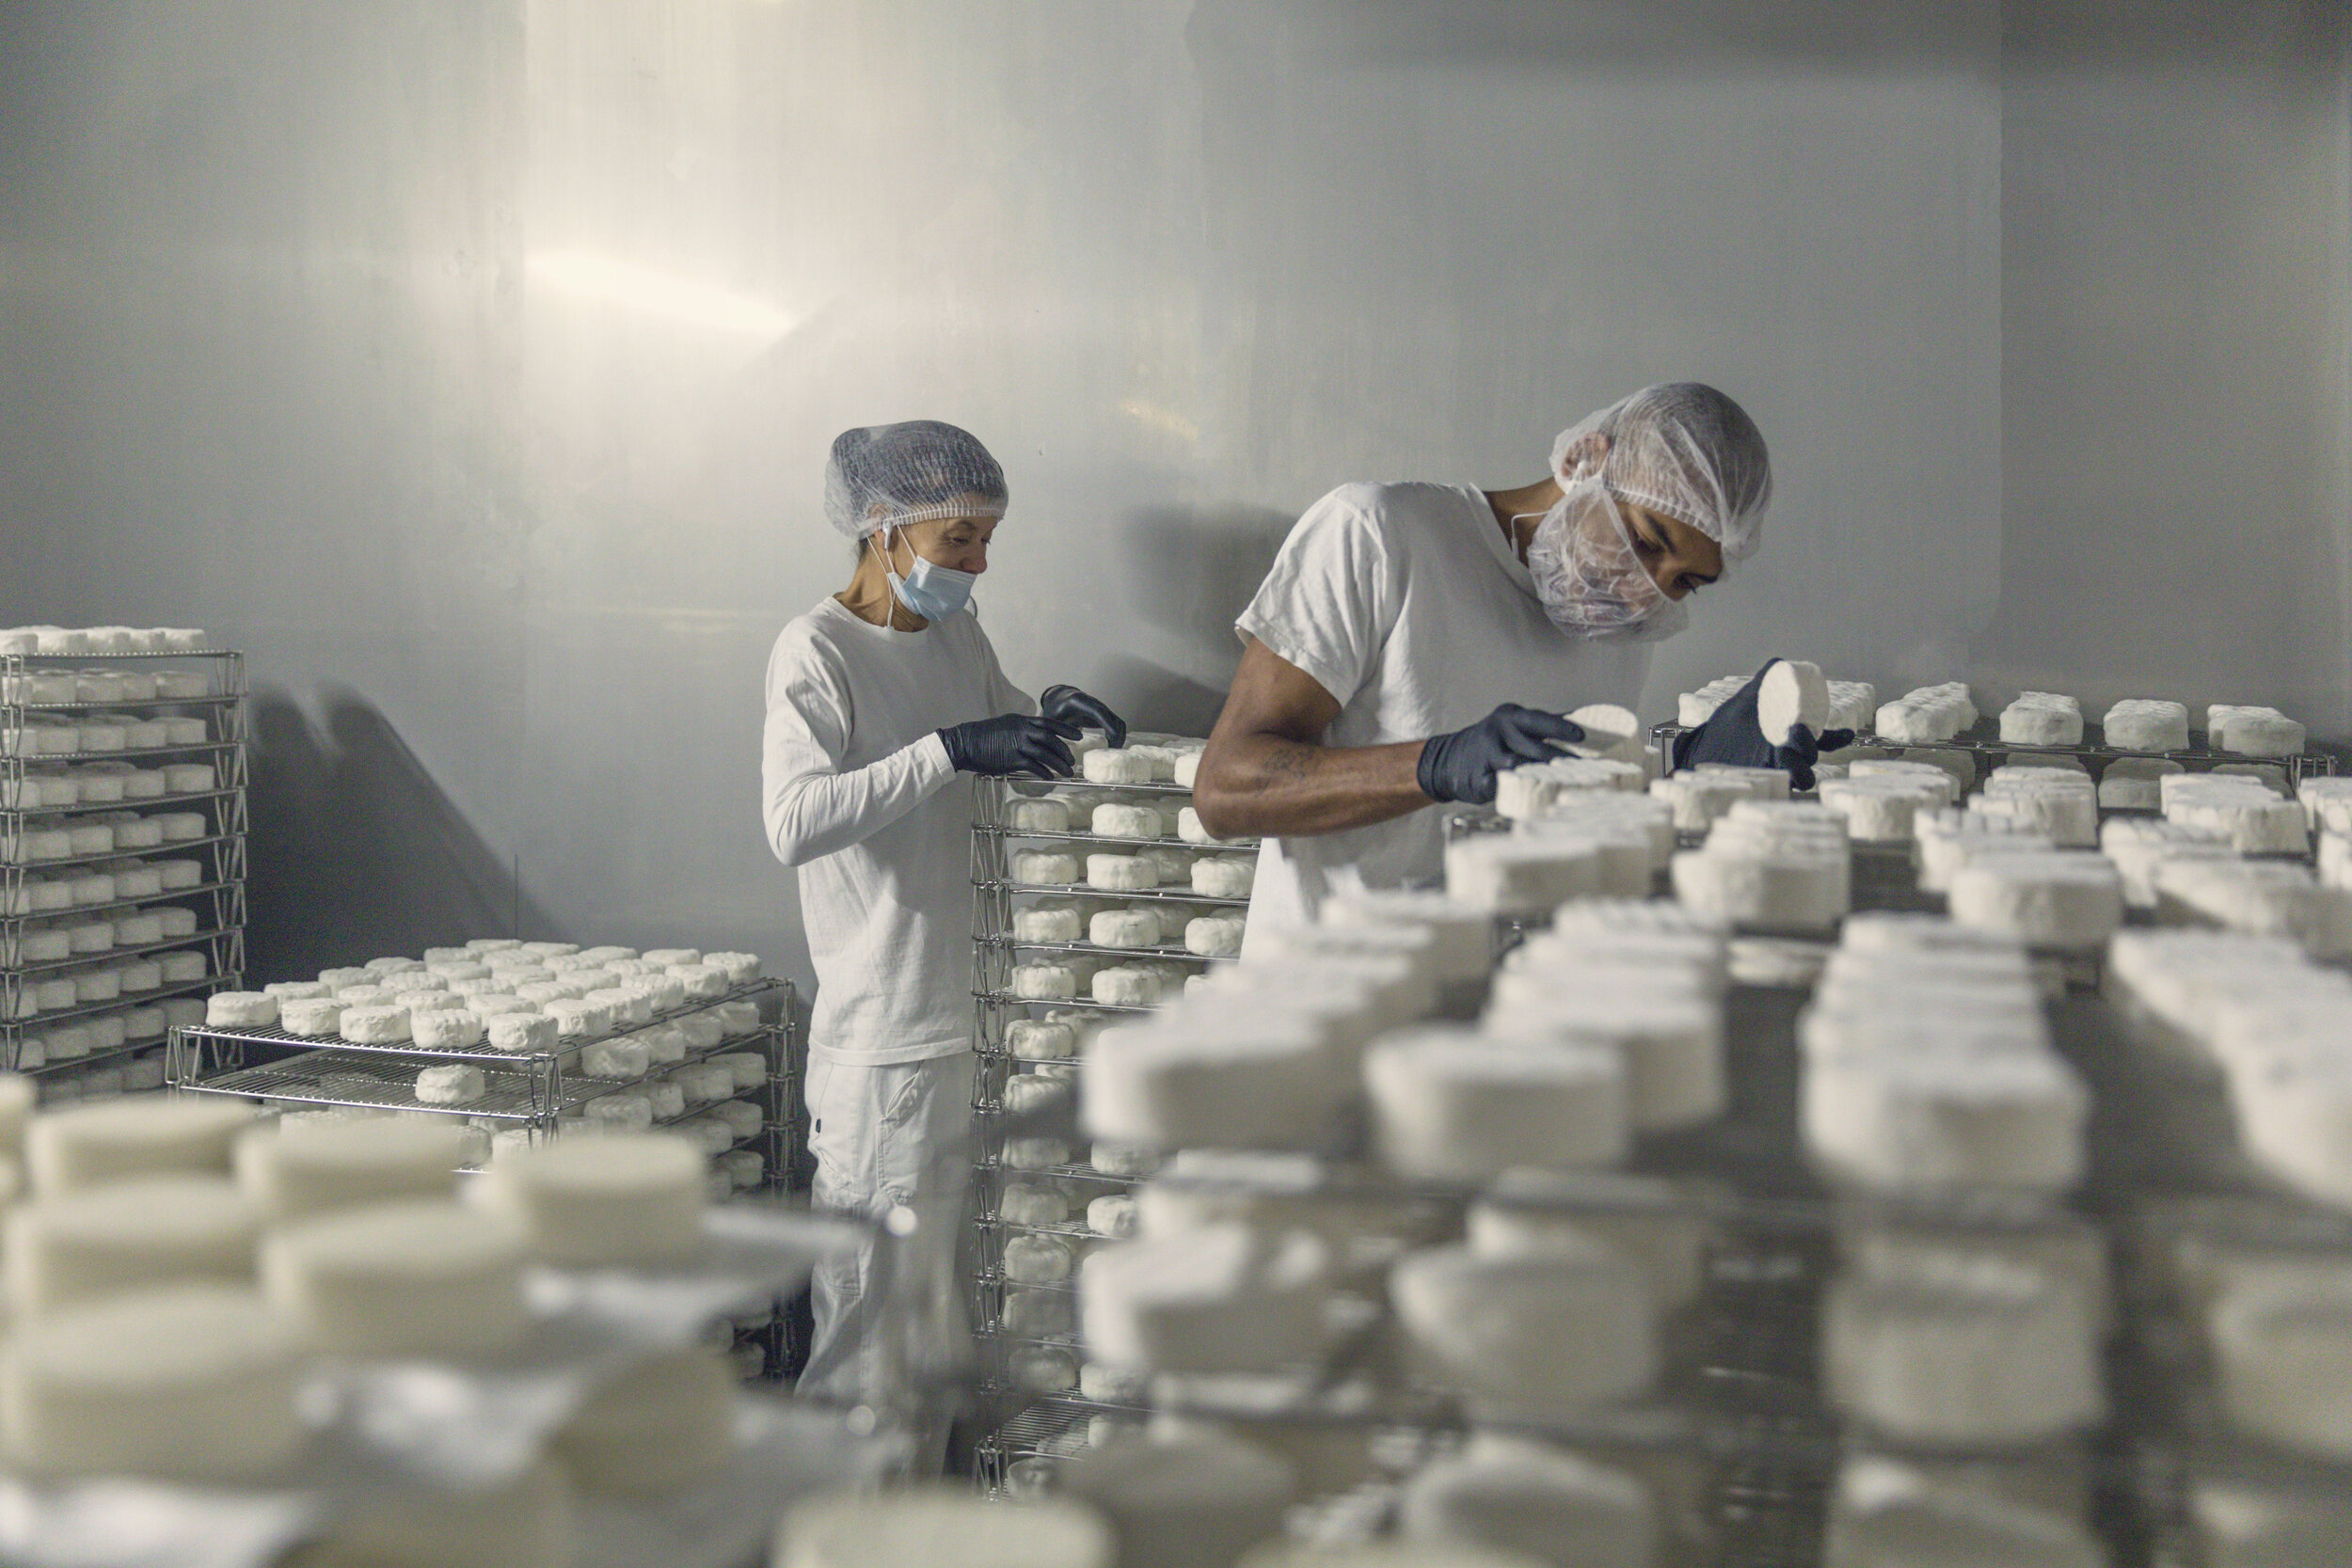 cheese-makers-at-work.JPG